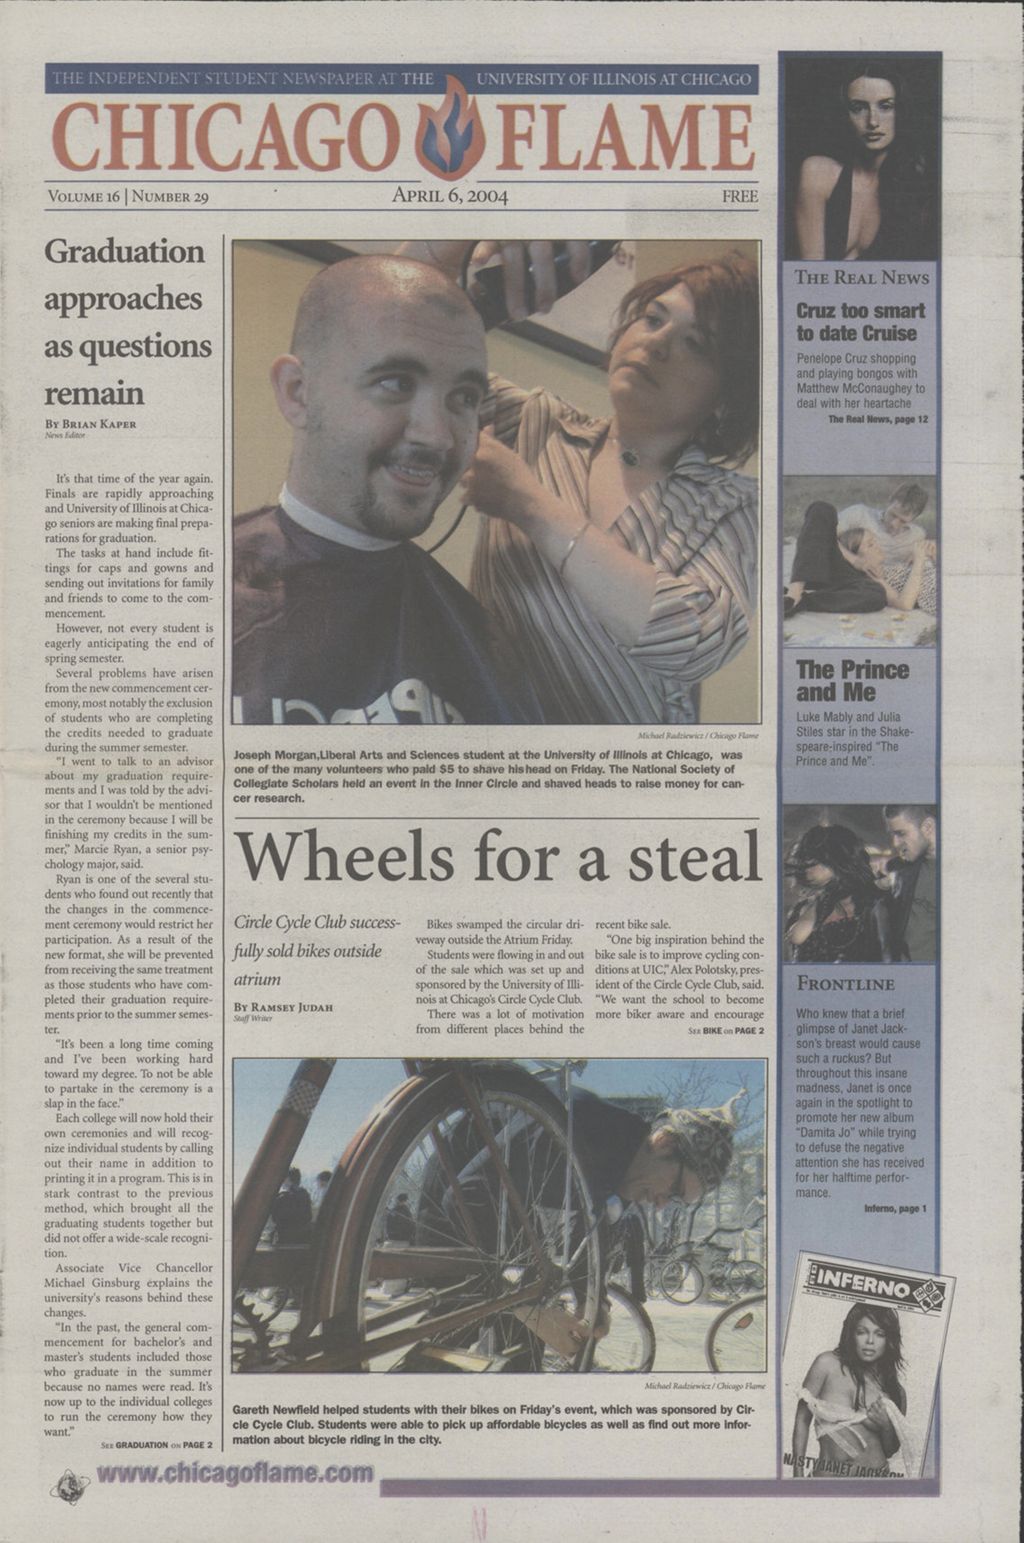 Chicago Flame (April 6, 2004)